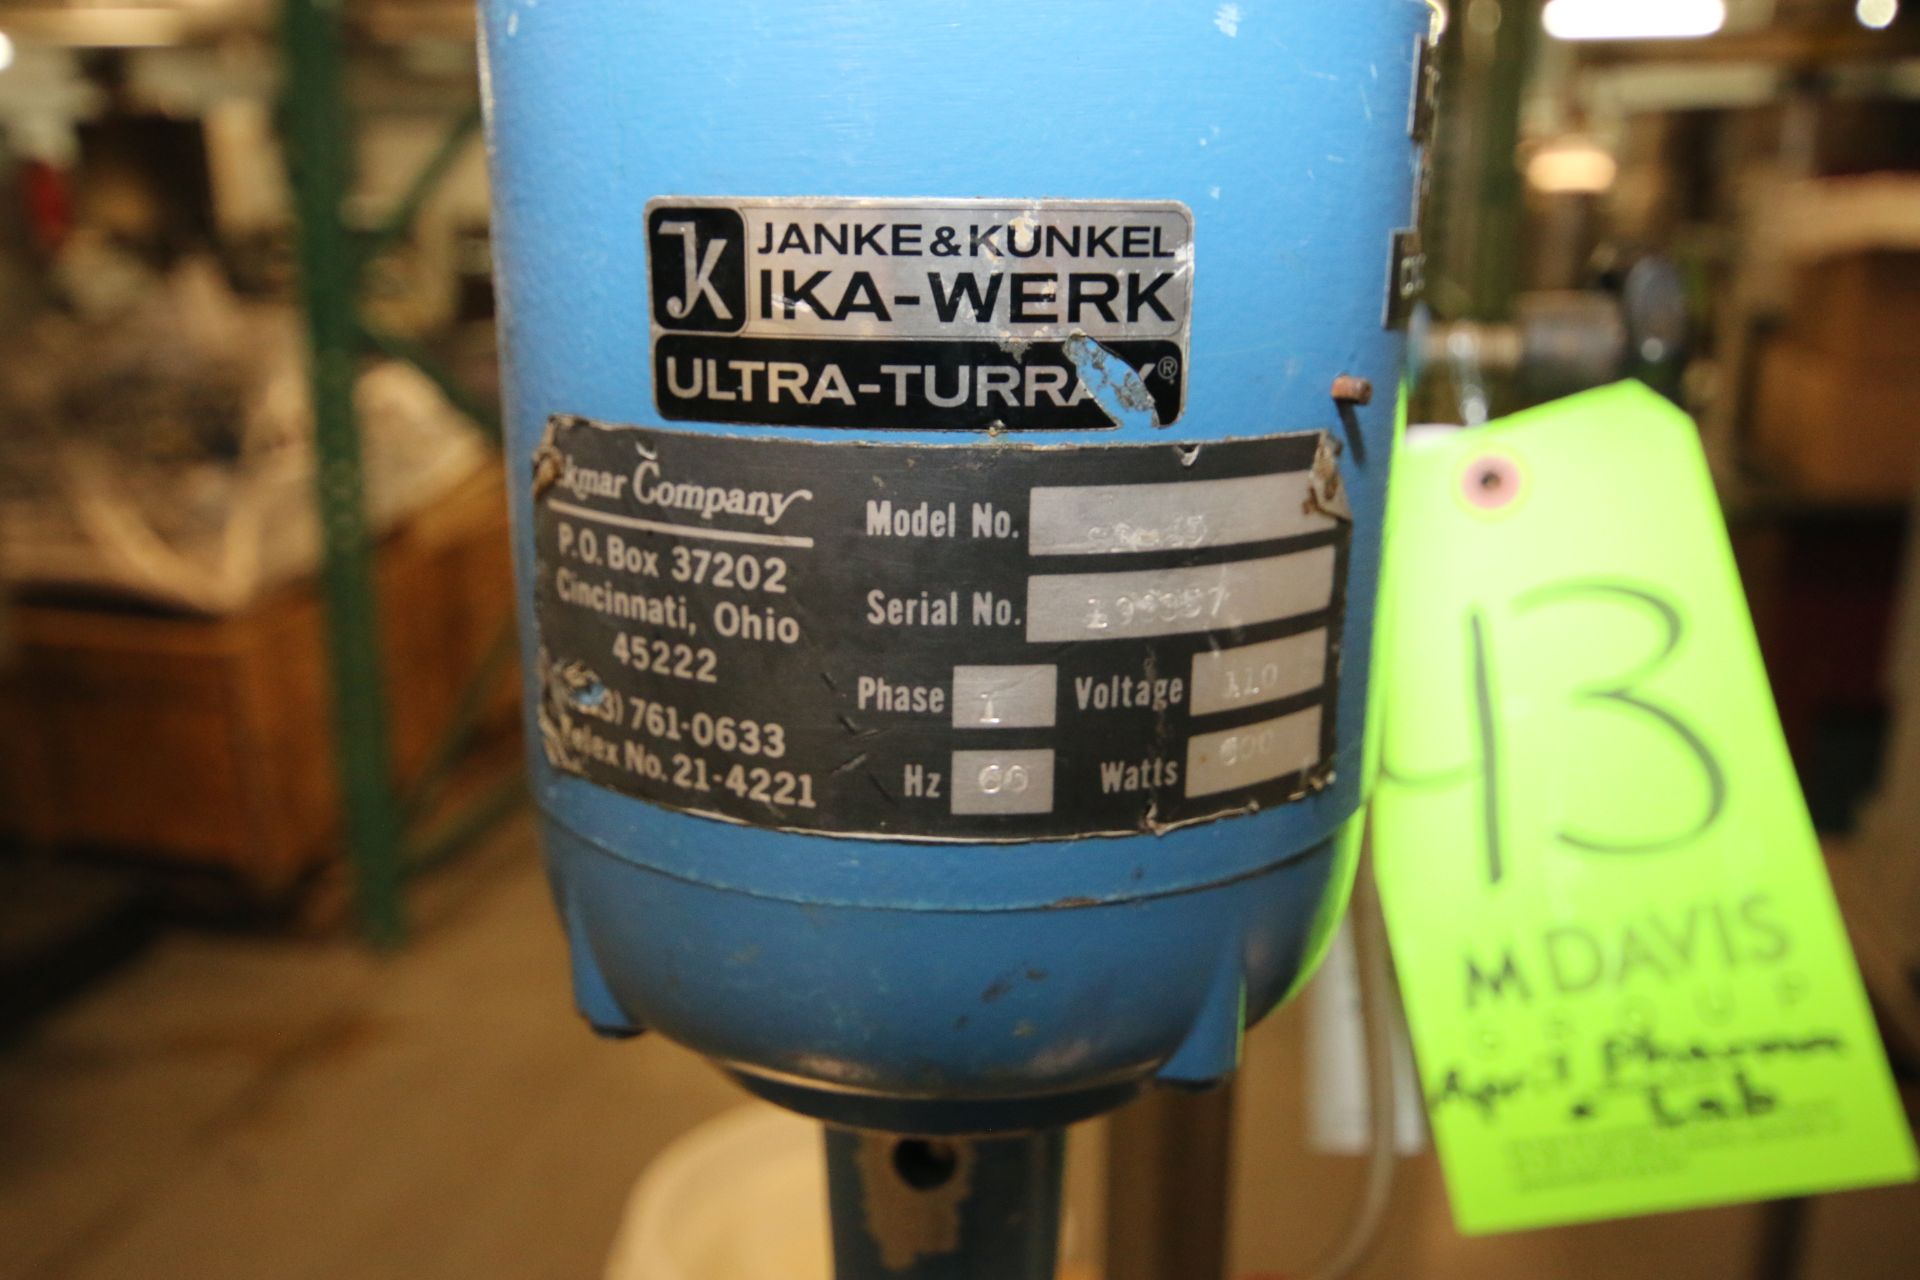 Janke & Kunkel IKA-Werk S/S Table Top Lab Mixer, M/N SD-45, S/N 100357, 110 Volts, 1 Phase, with S/S - Image 3 of 4